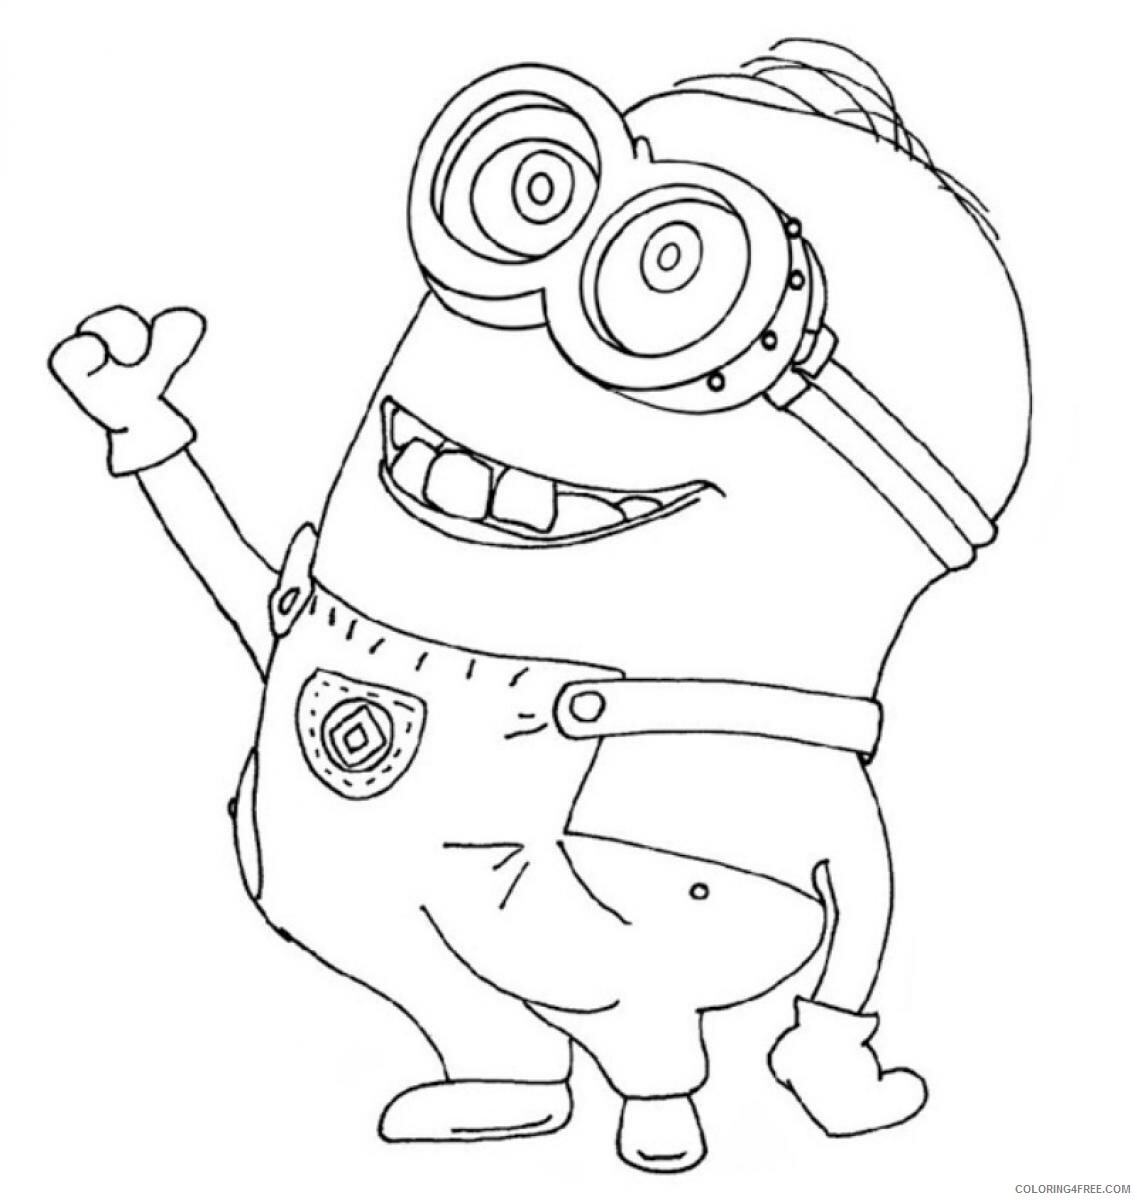 Minions Coloring Pages TV Film Despicable Me Minion Printable 2020 05174 Coloring4free